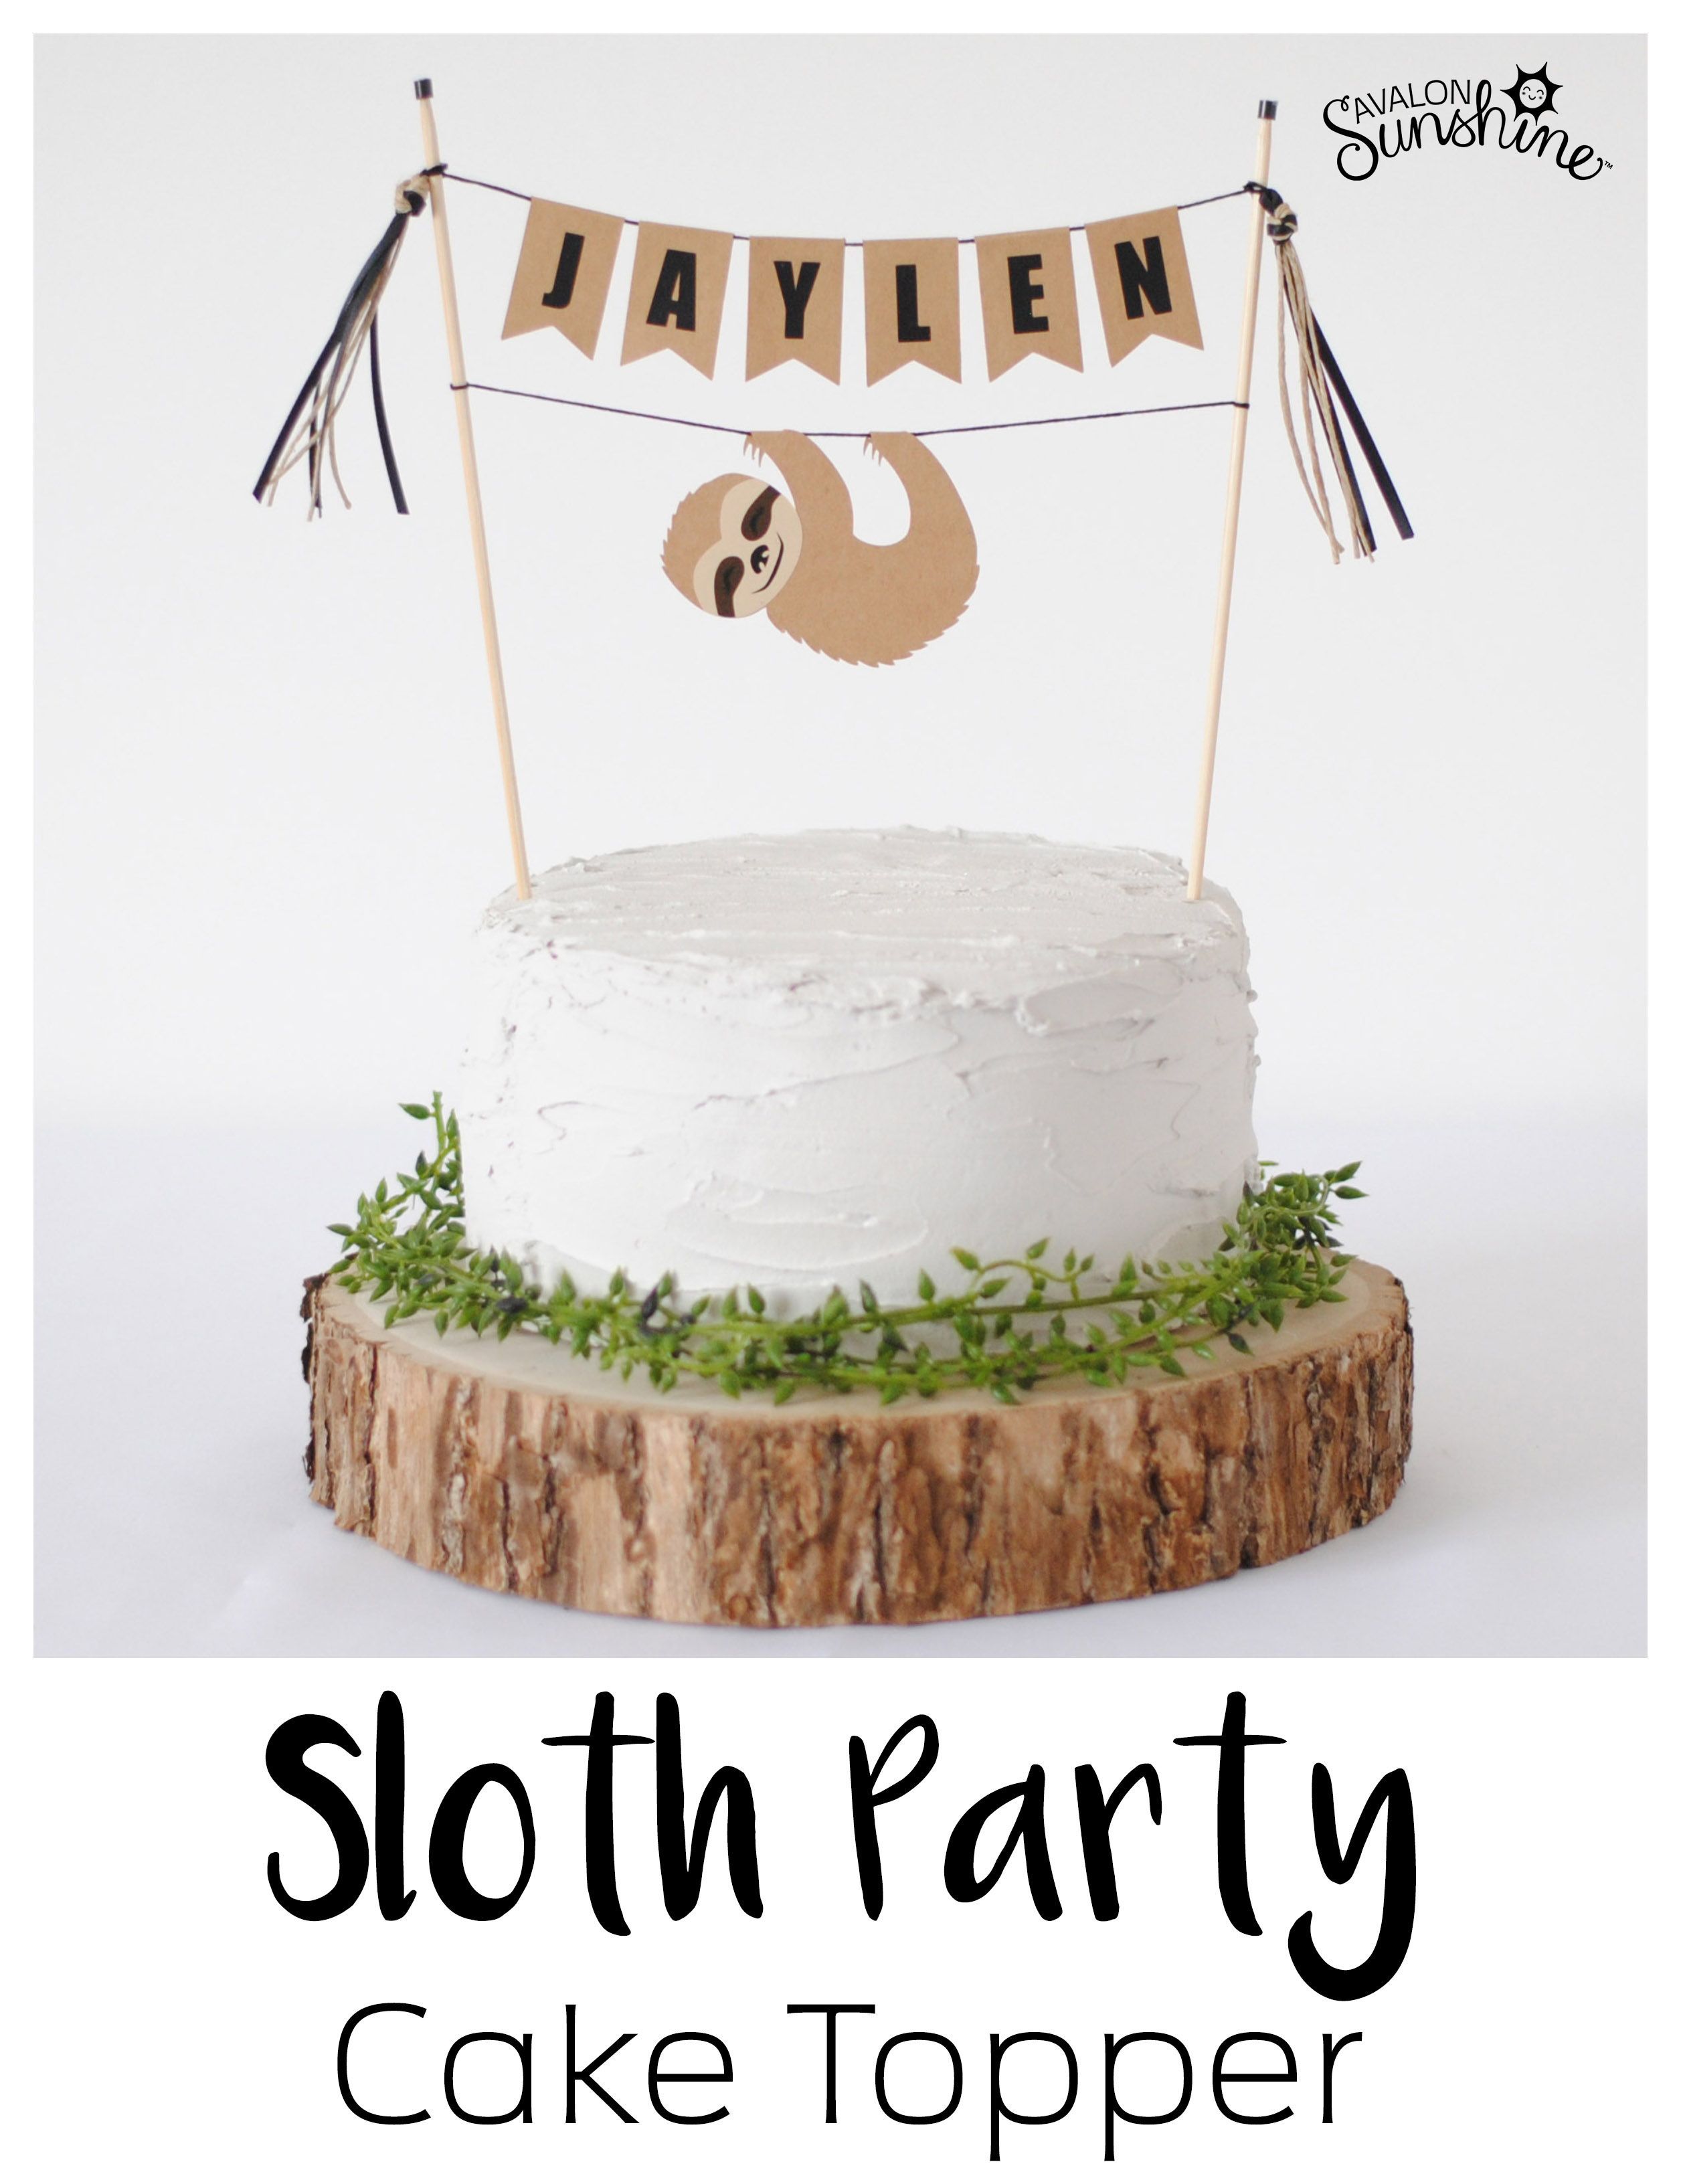 Sloth Party Cake Topper -   20 cake Birthday party ideas